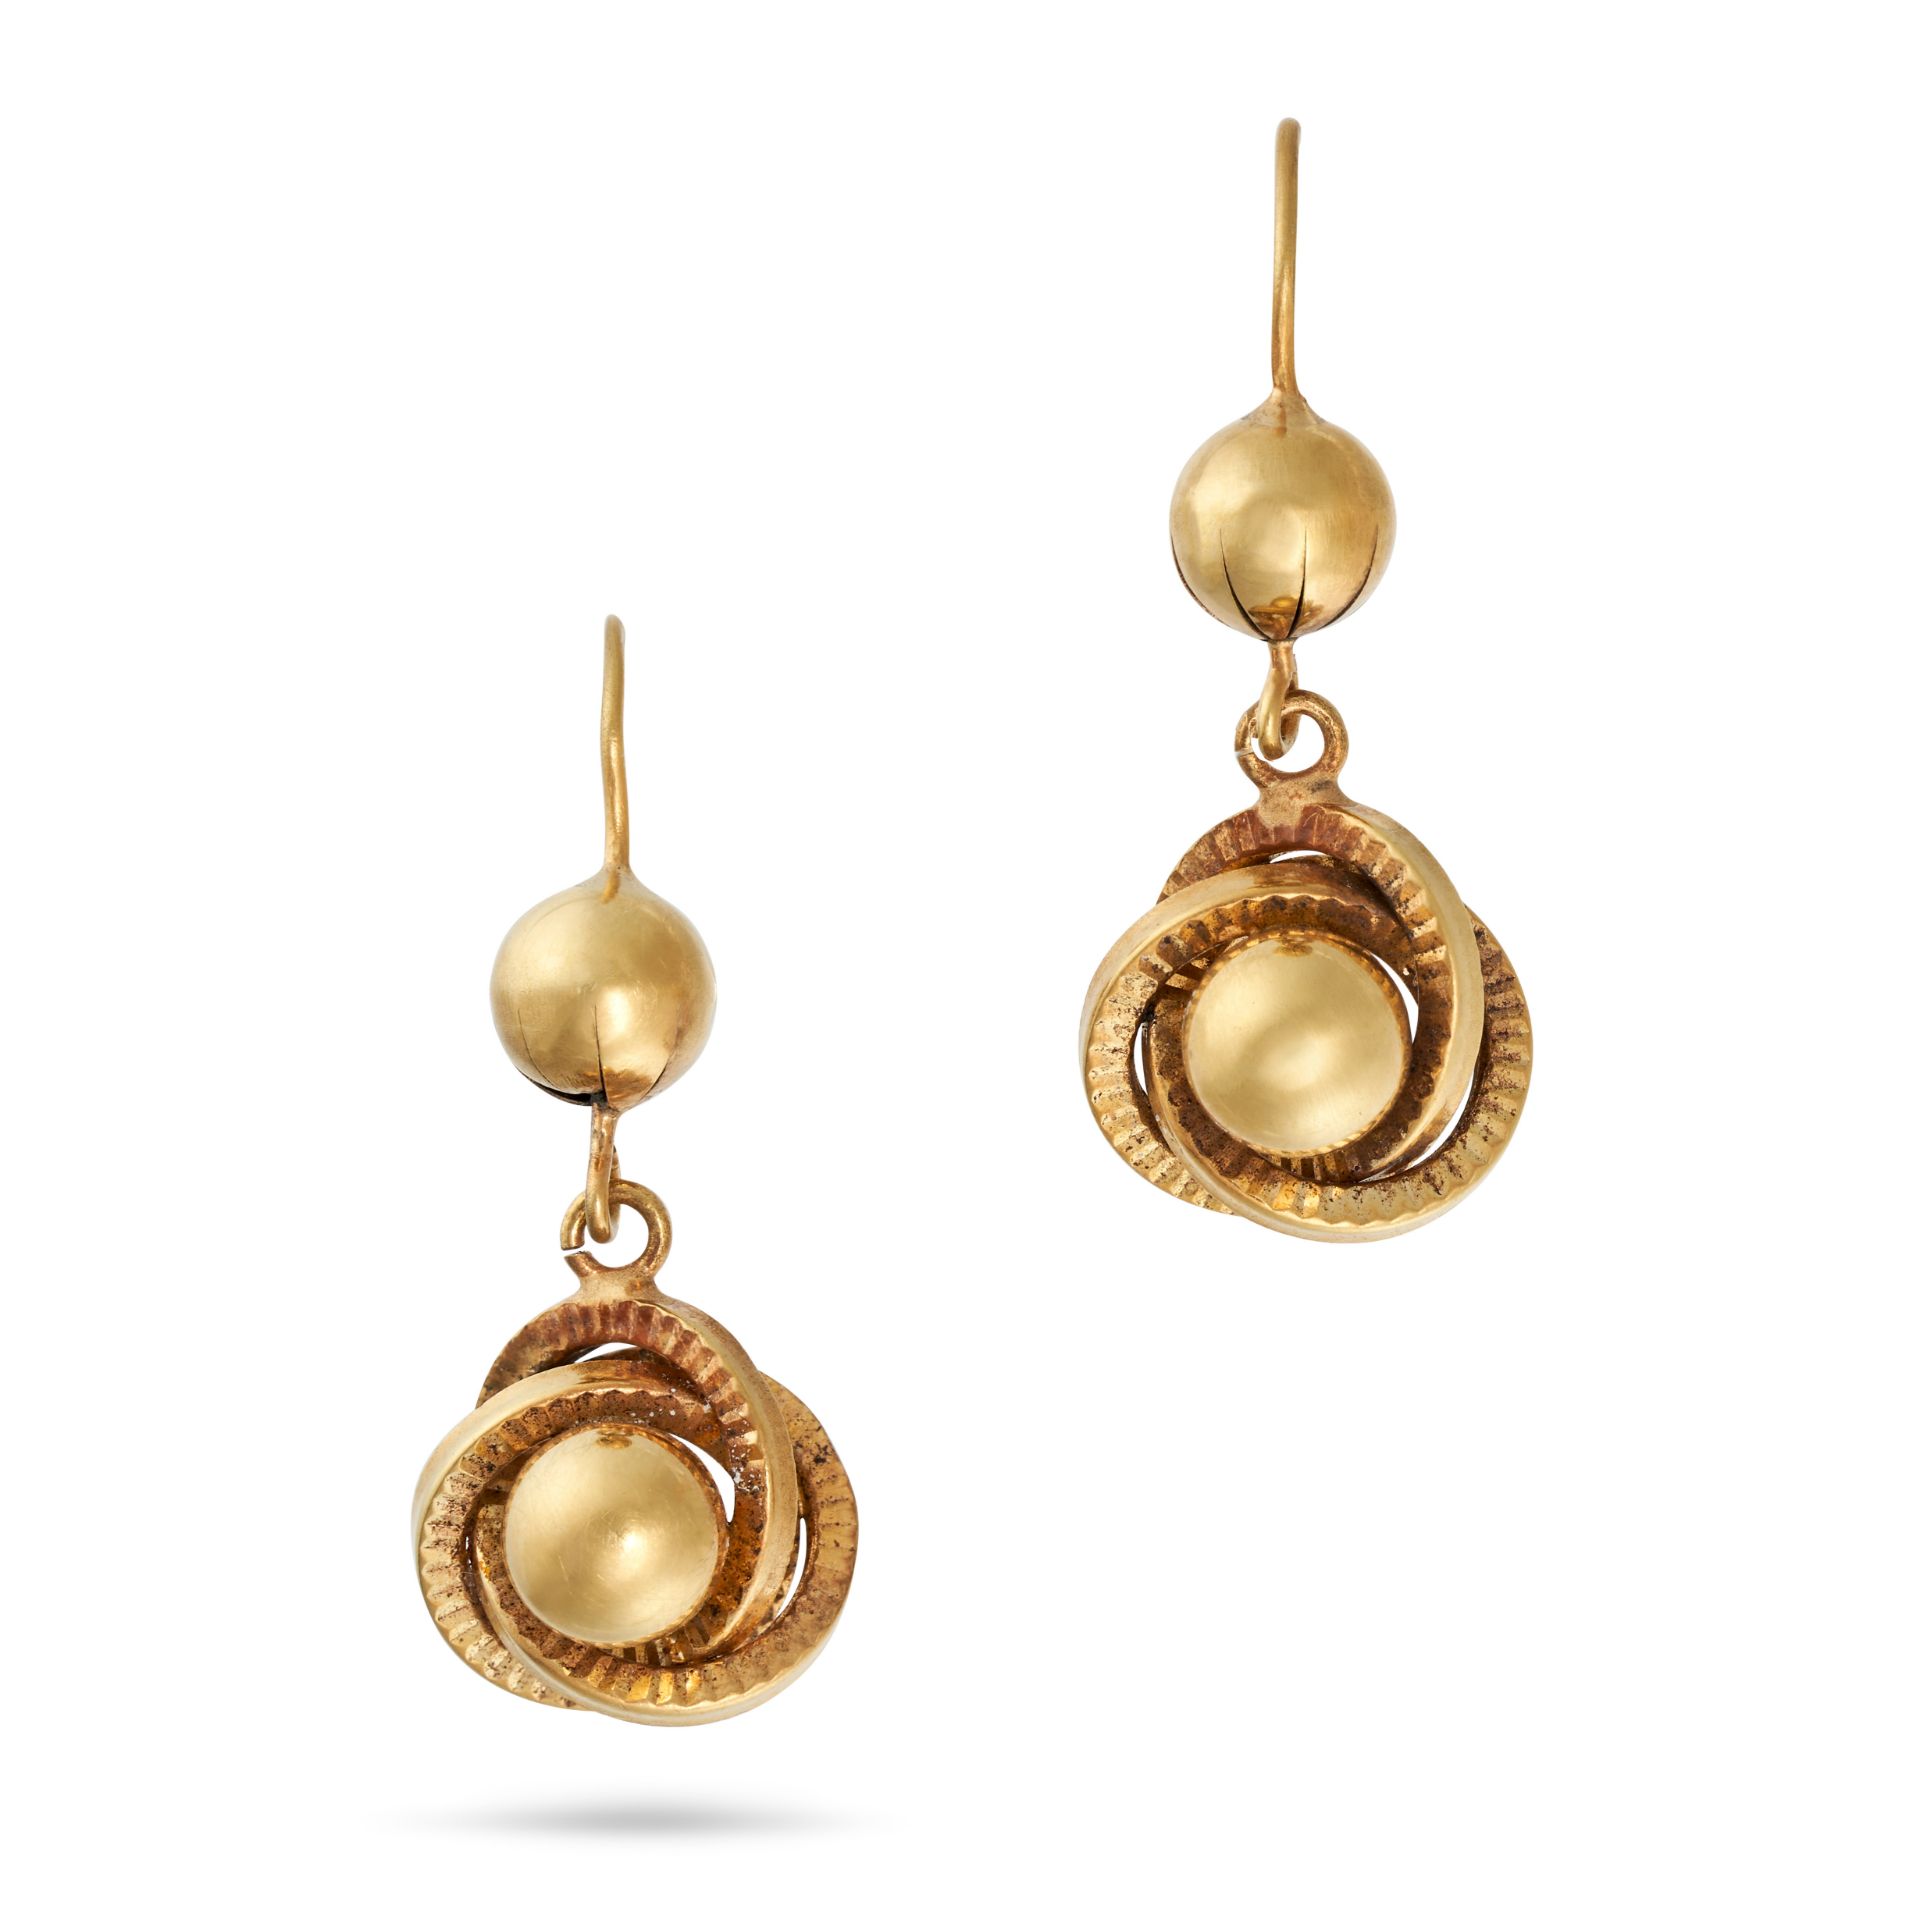 A PAIR OF LOVER'S KNOT EARRINGS in 9ct yellow gold, each earring designed as a lover's knot set t...